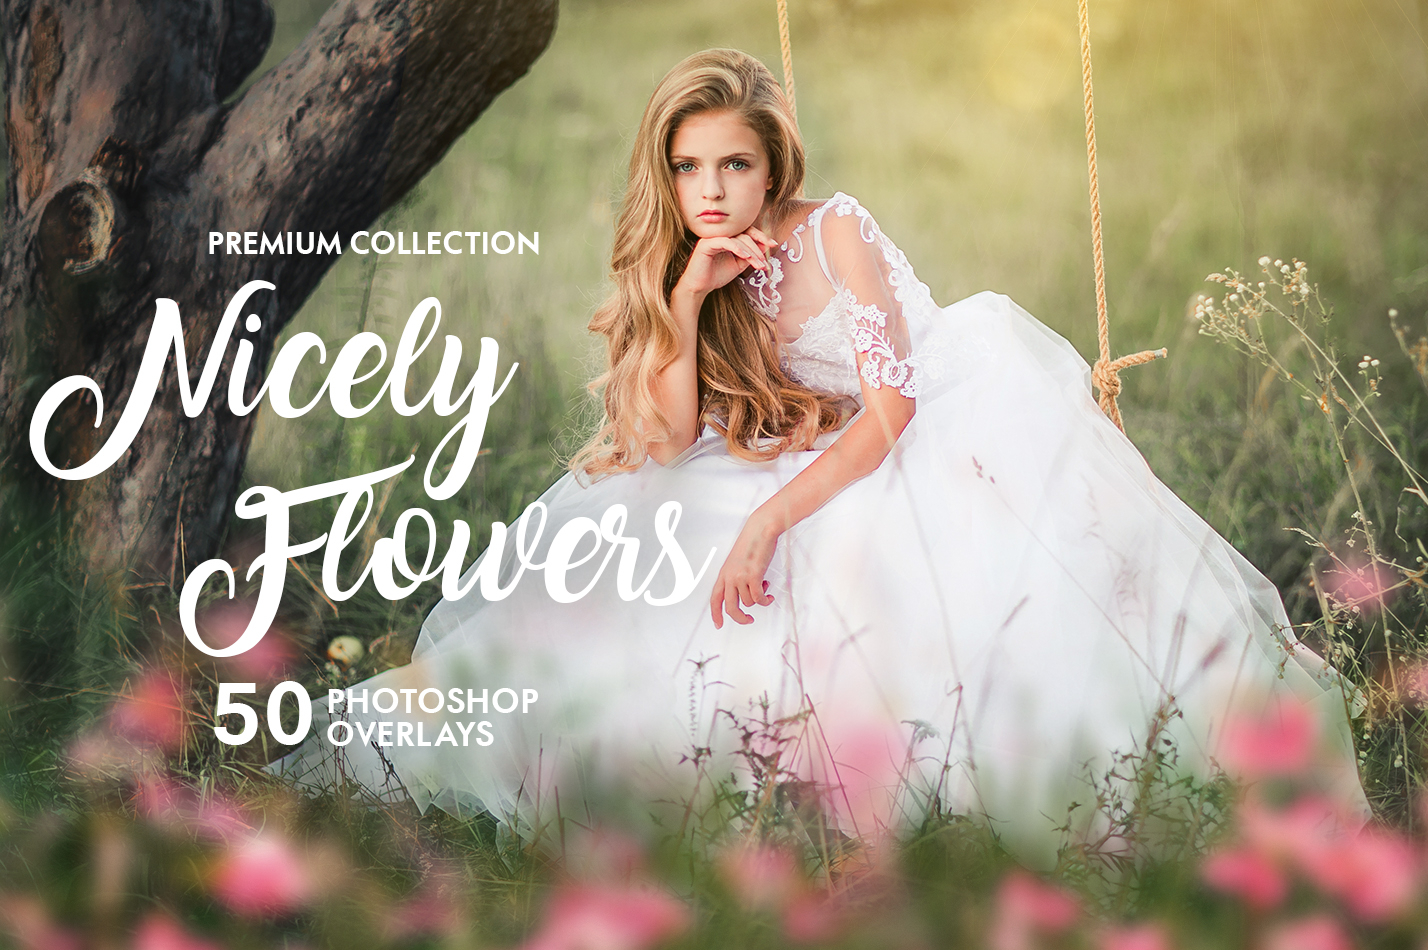 Free Flower Overlay|Download Flower Overlays Photoshop for Free